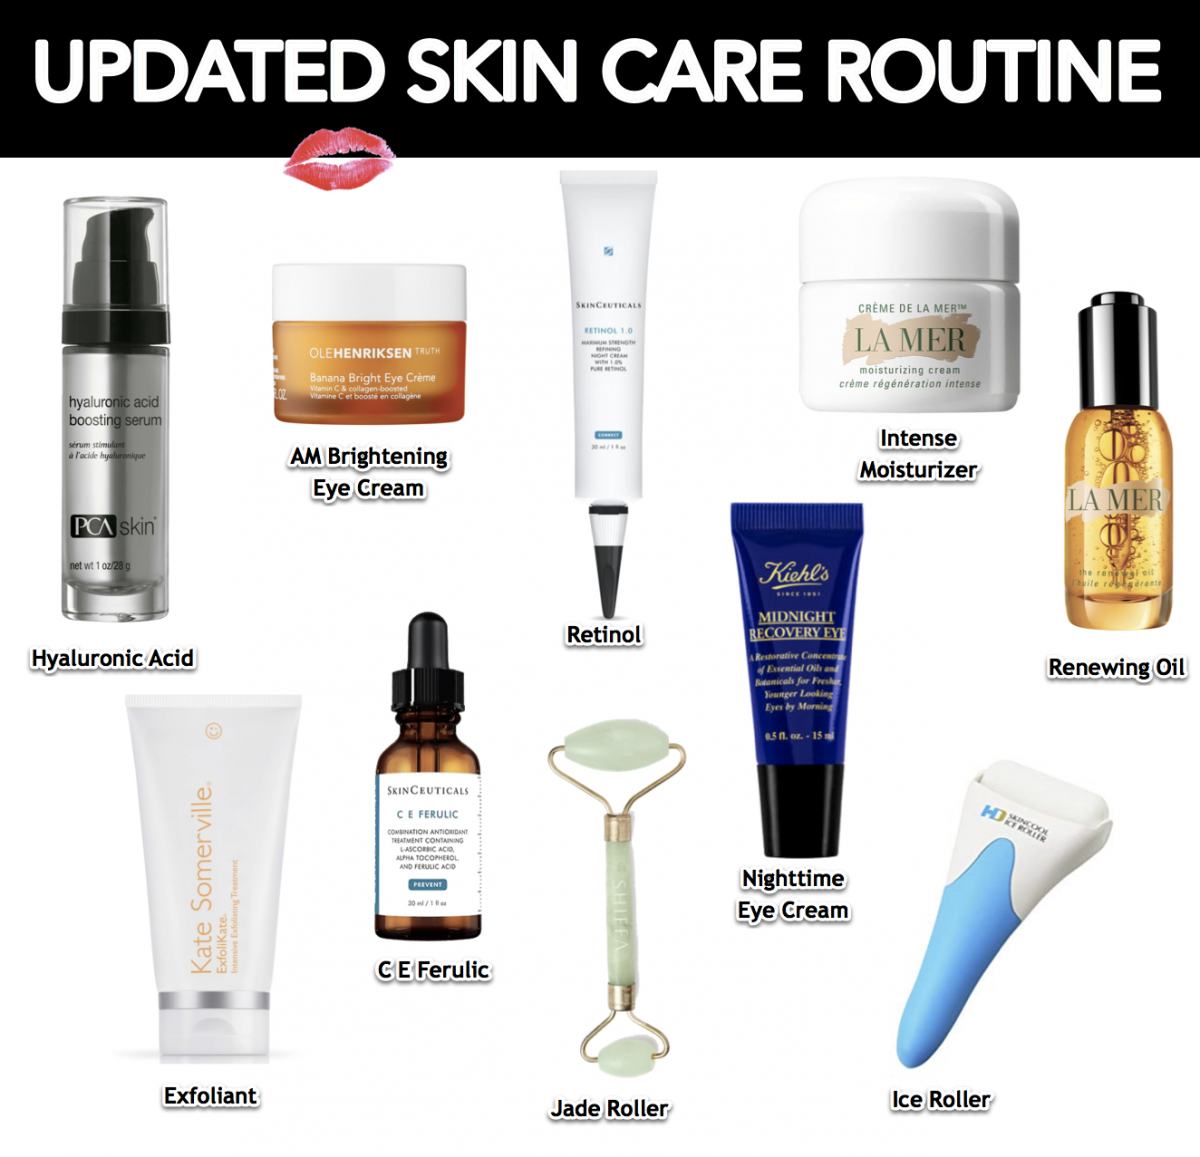 EMILY-gemma-update-skin-care-routine-jade-roller-review-best-hyaluronic-acid-best-retinol-for-young-people-best-la-mer-products